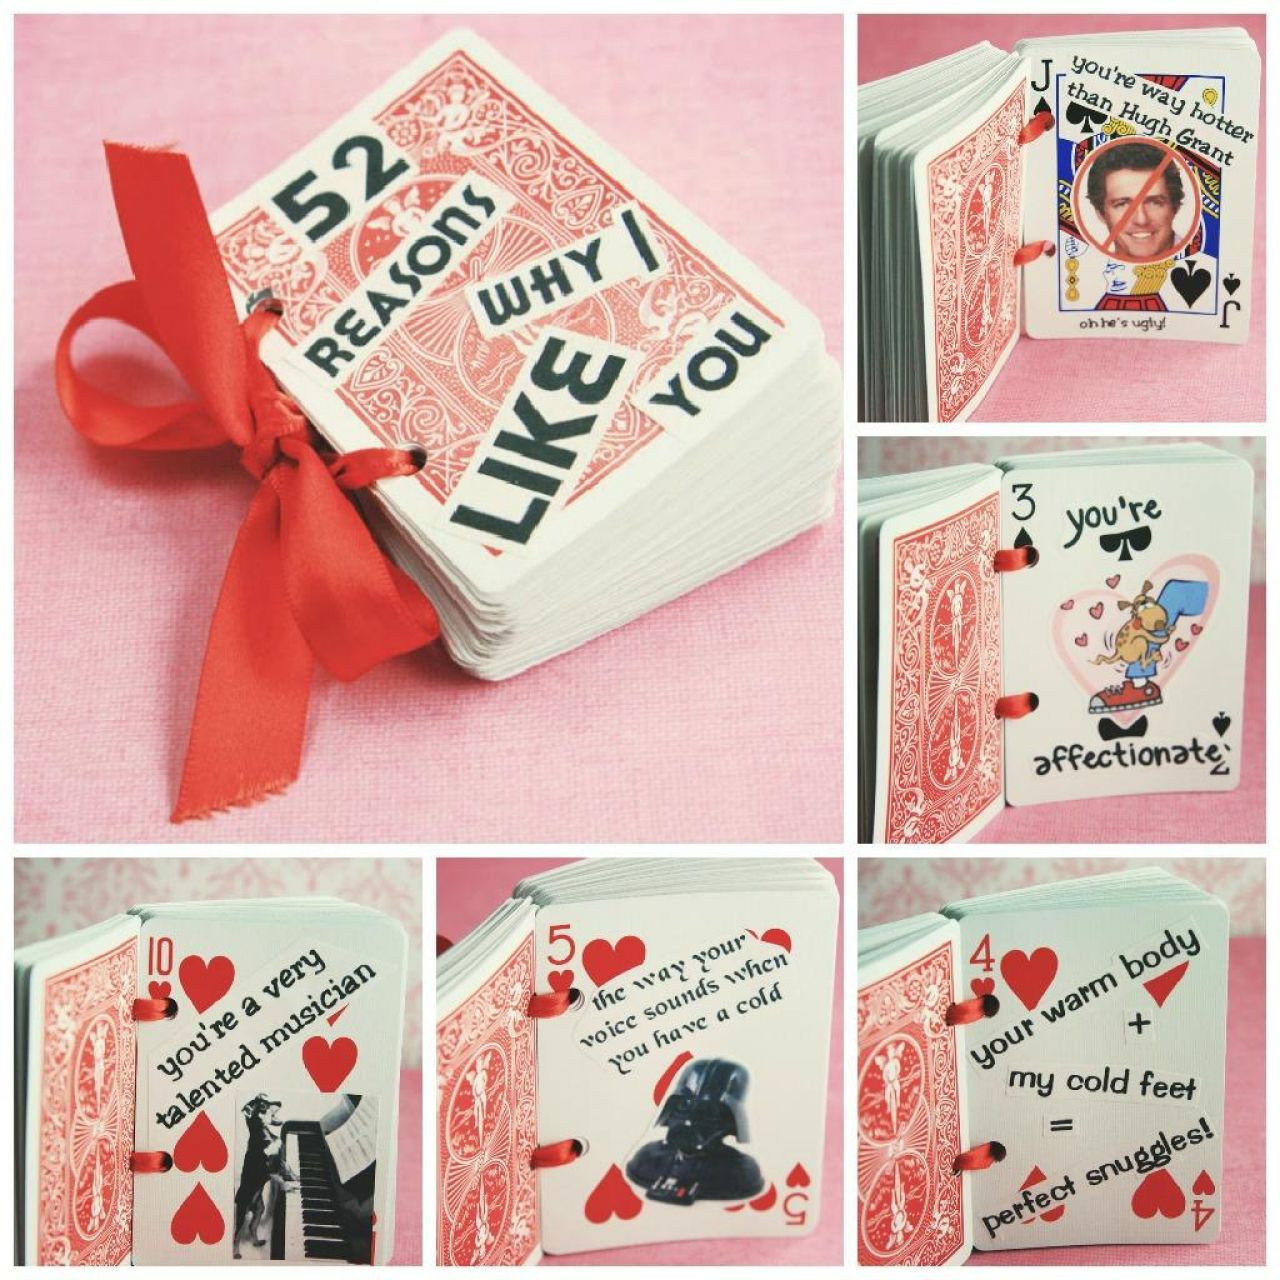 Creative Valentines Day Gifts
 24 LOVELY VALENTINE S DAY GIFTS FOR YOUR BOYFRIEND